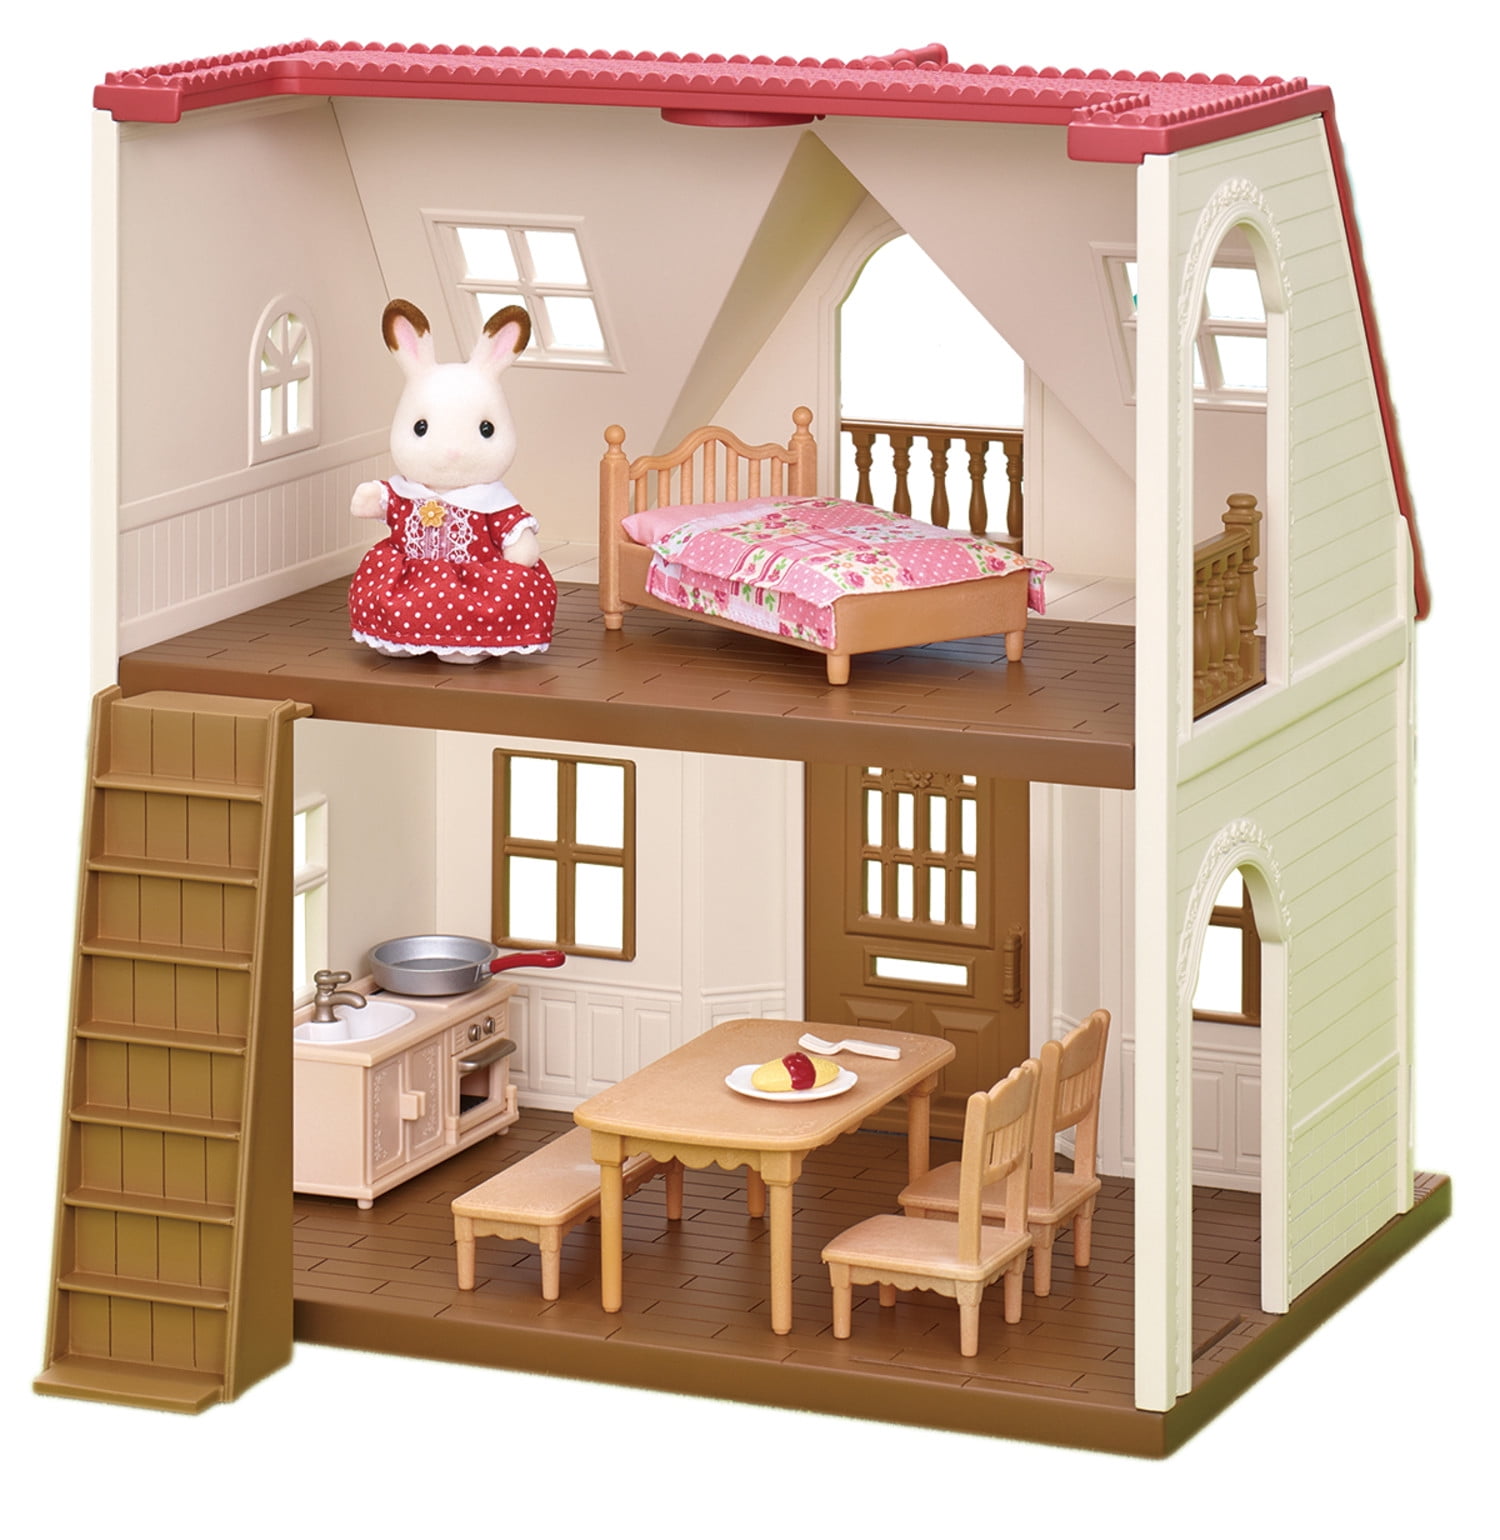 Sylvanian Families Kitchen Furniture SparesBeach Cafe Diner Long Bench Couch 